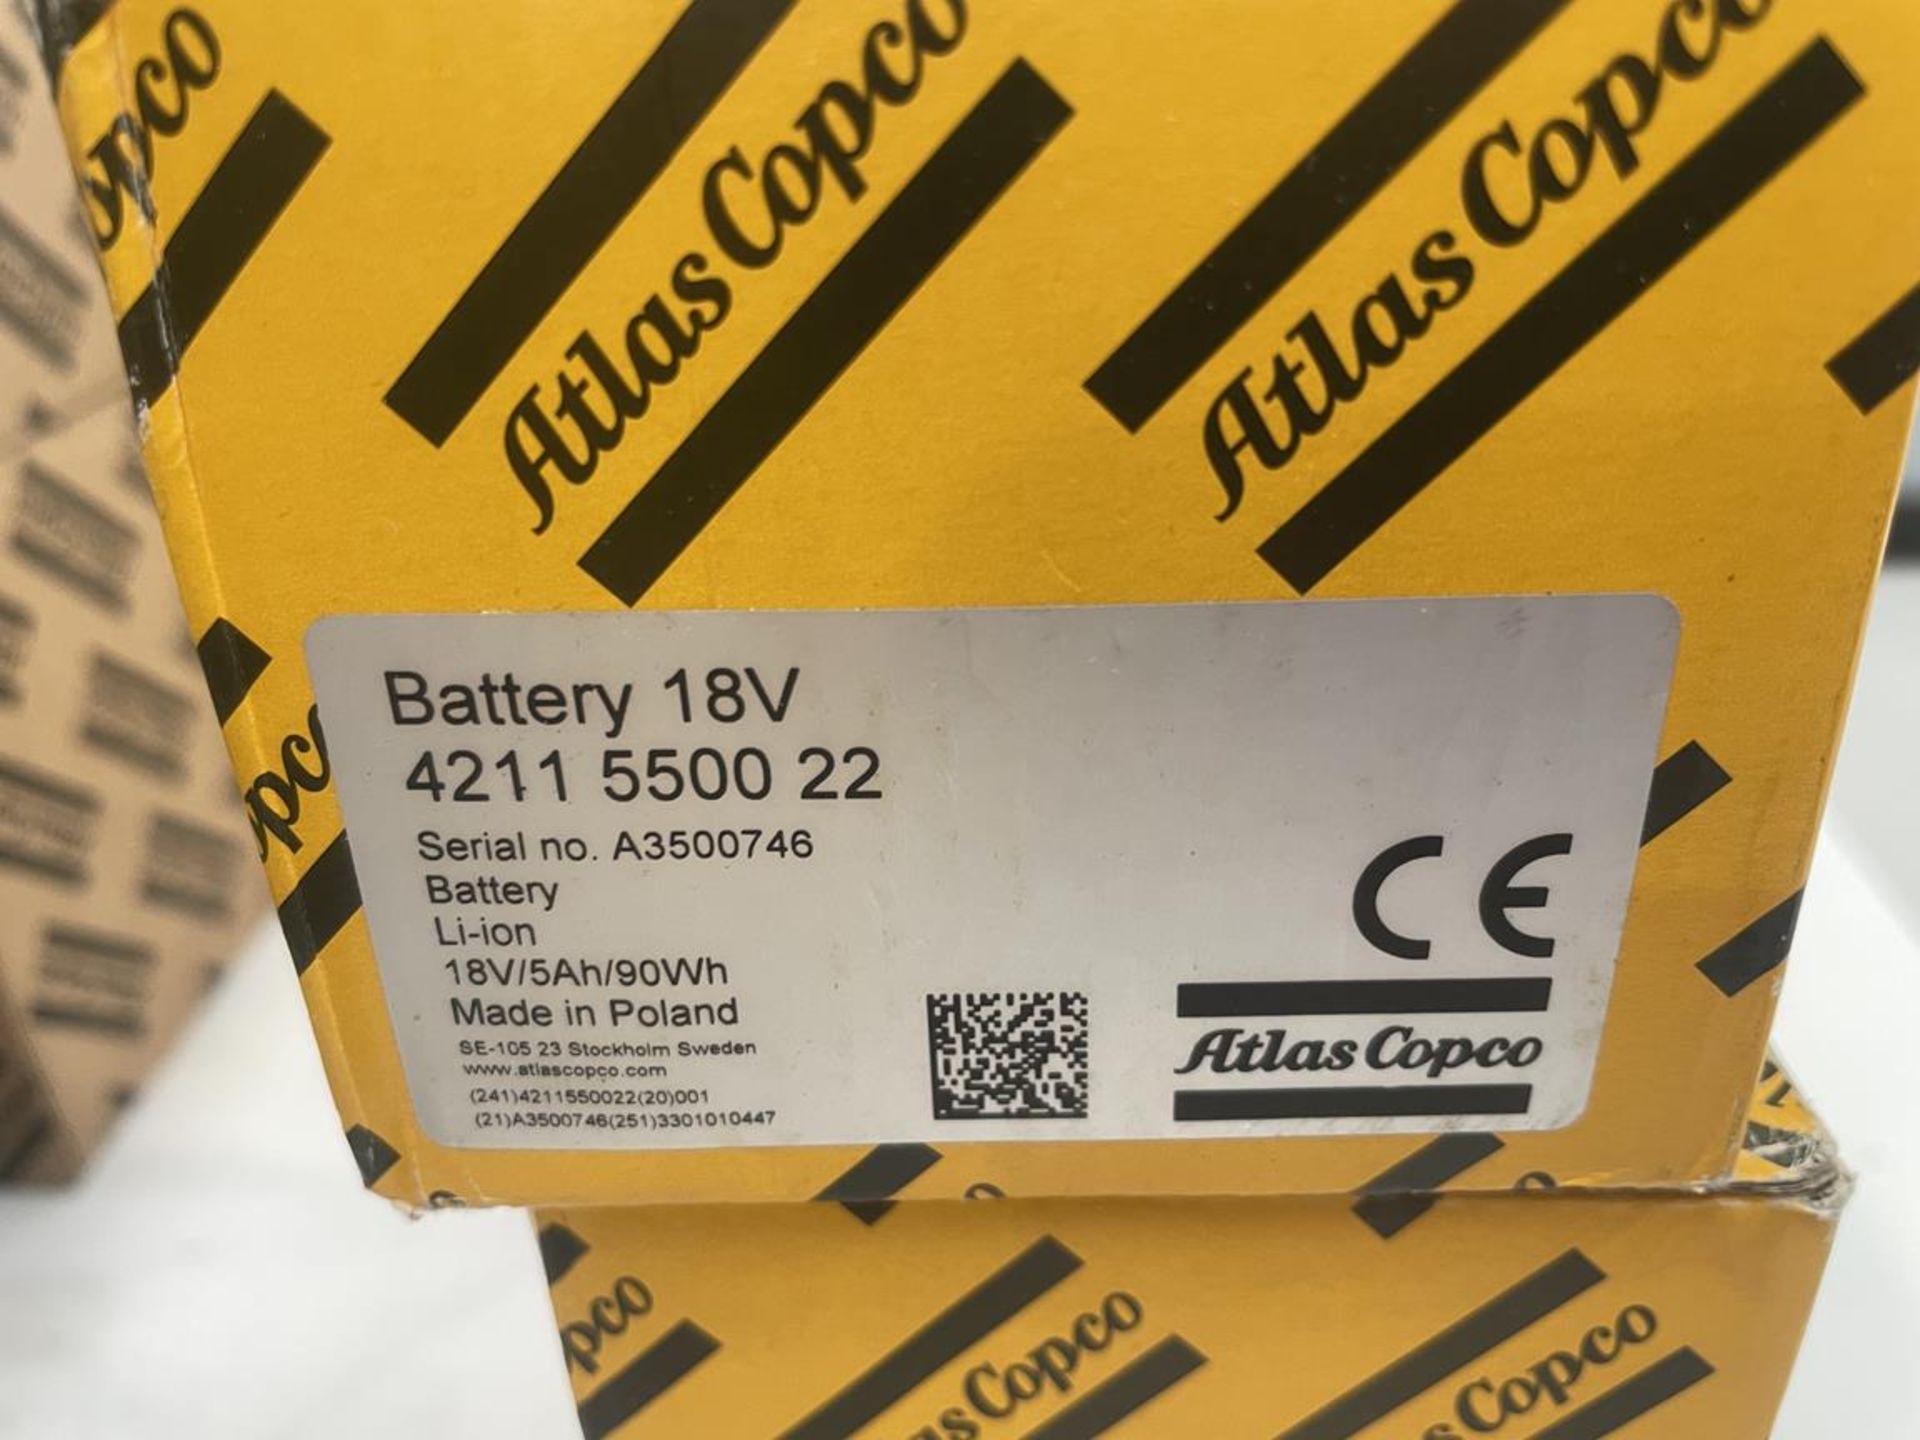 3x (no.) Atlas Copco, 4211 5500 22 batteries, 18v (boxed and unused) - Image 2 of 4